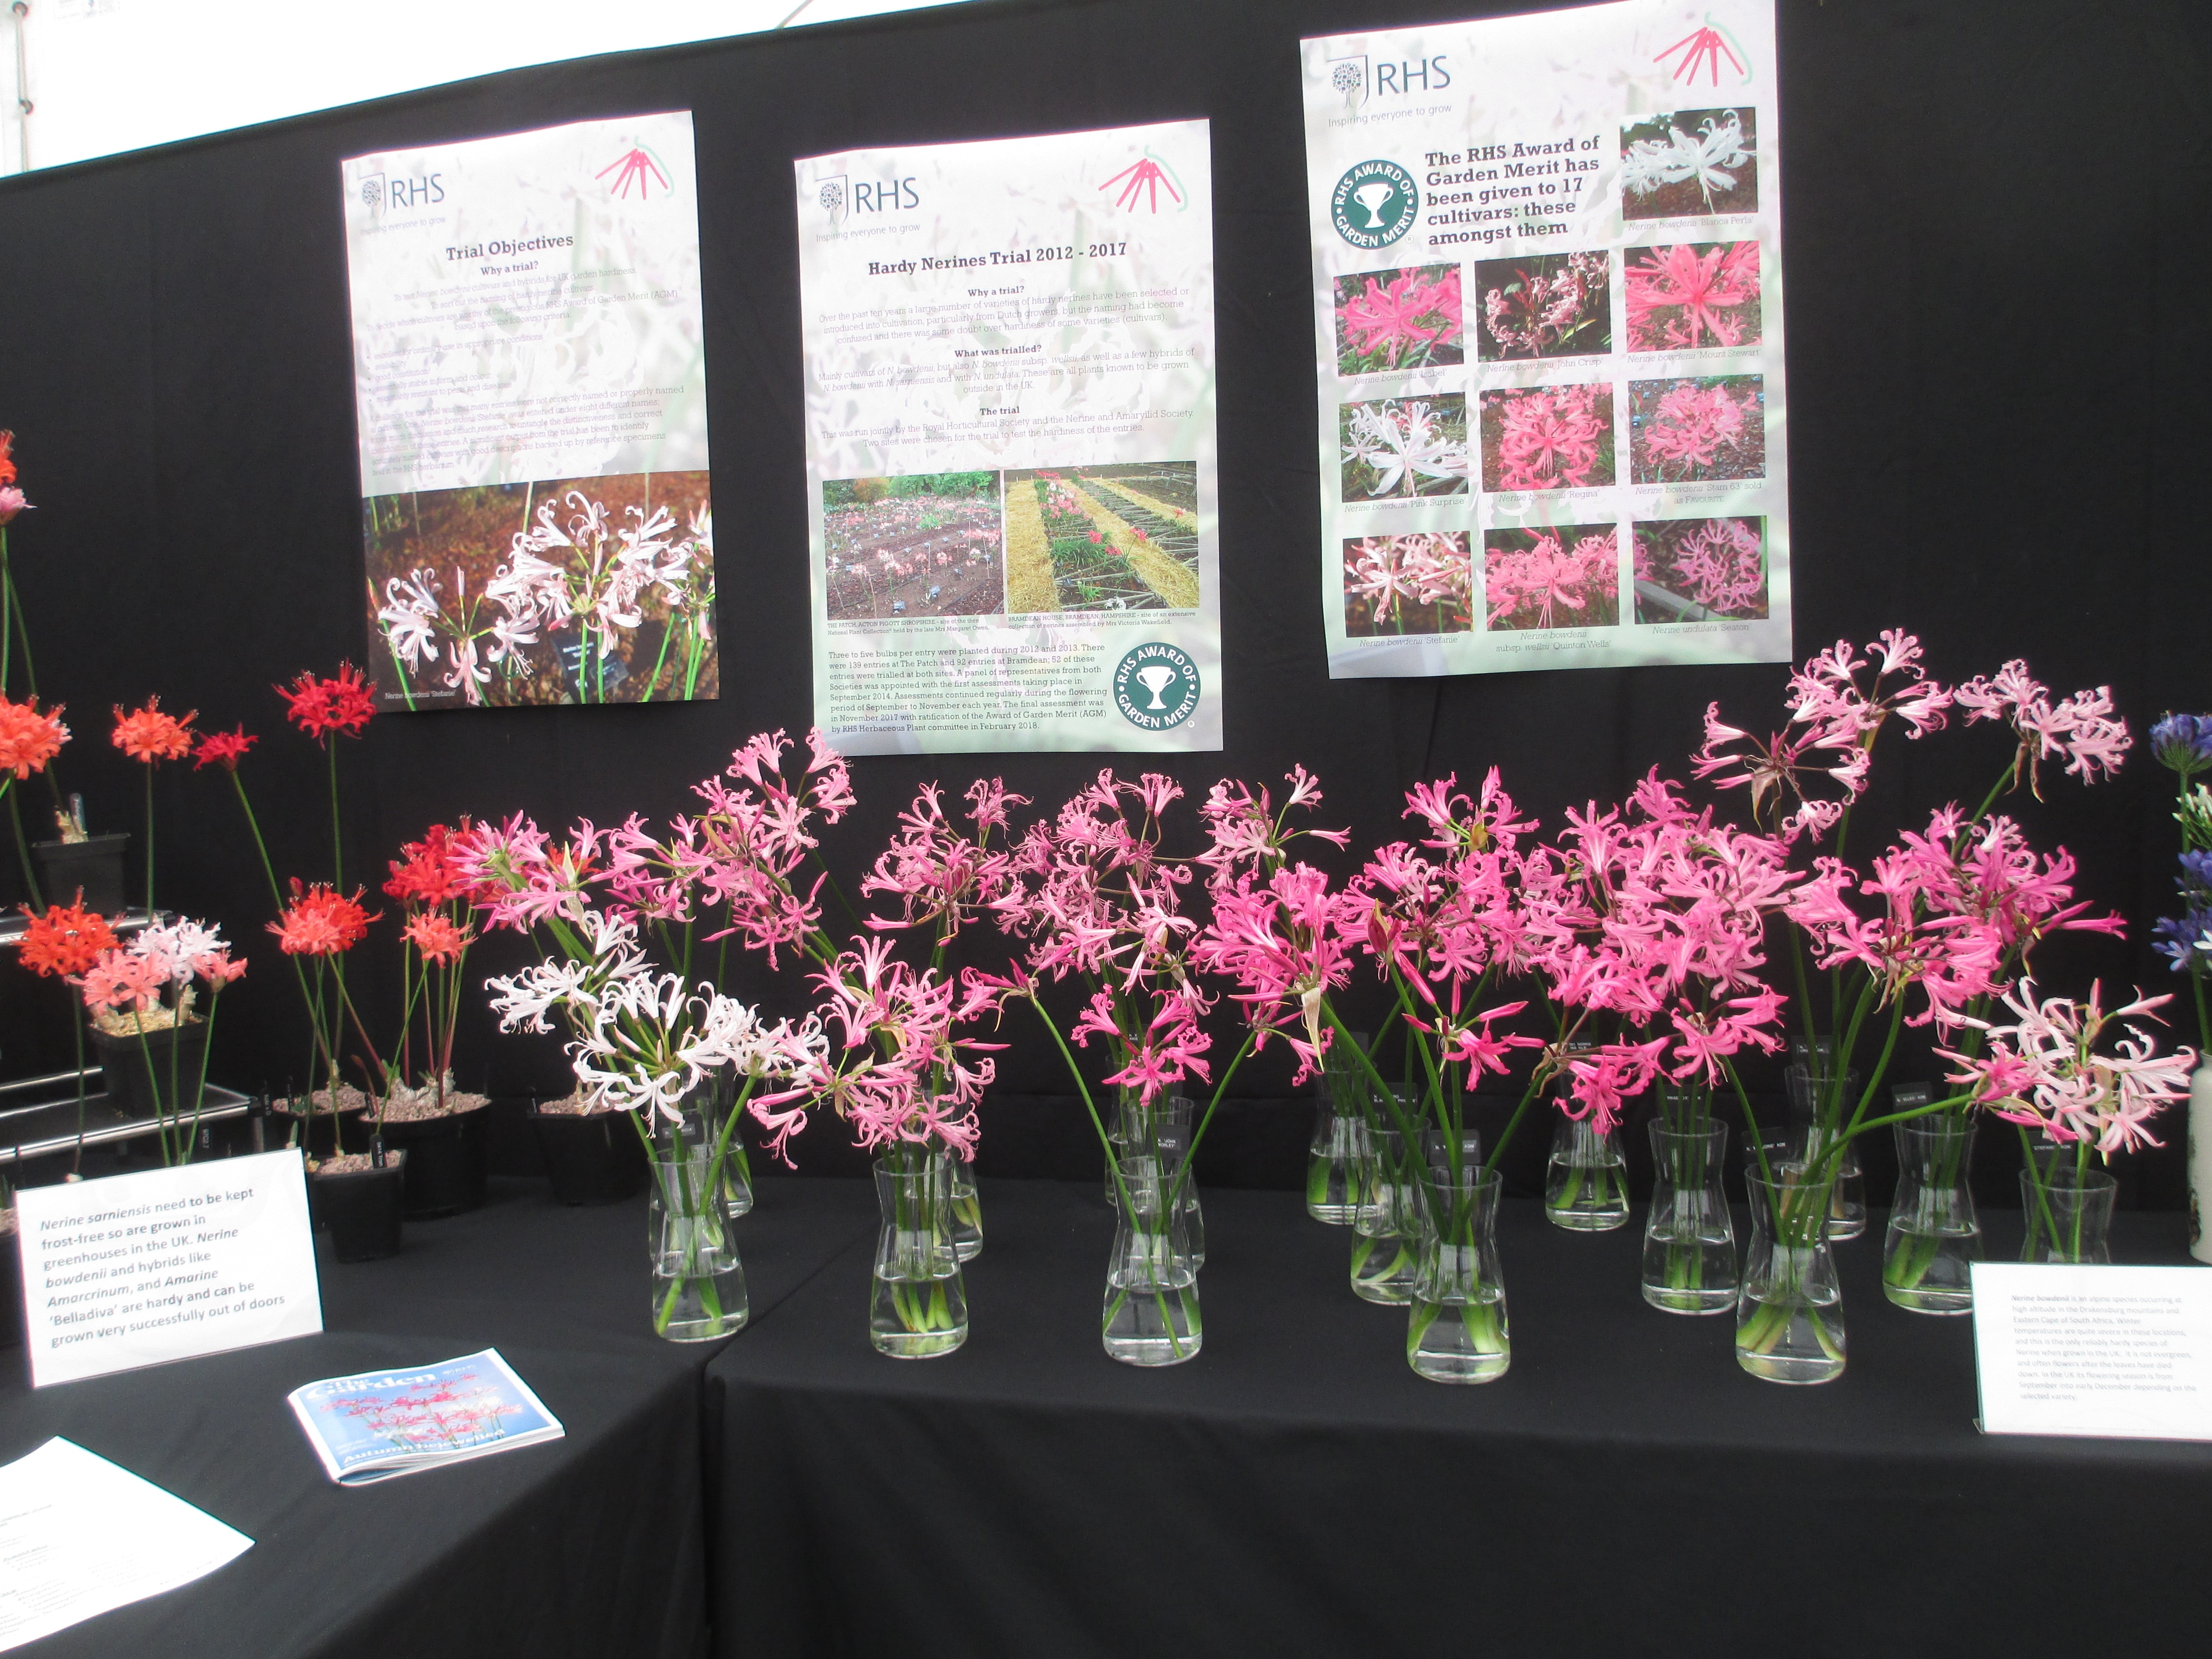 Nerine bowdenii from the late Margaret Owen's garden, which featured in the RHS Trial described on the posters.